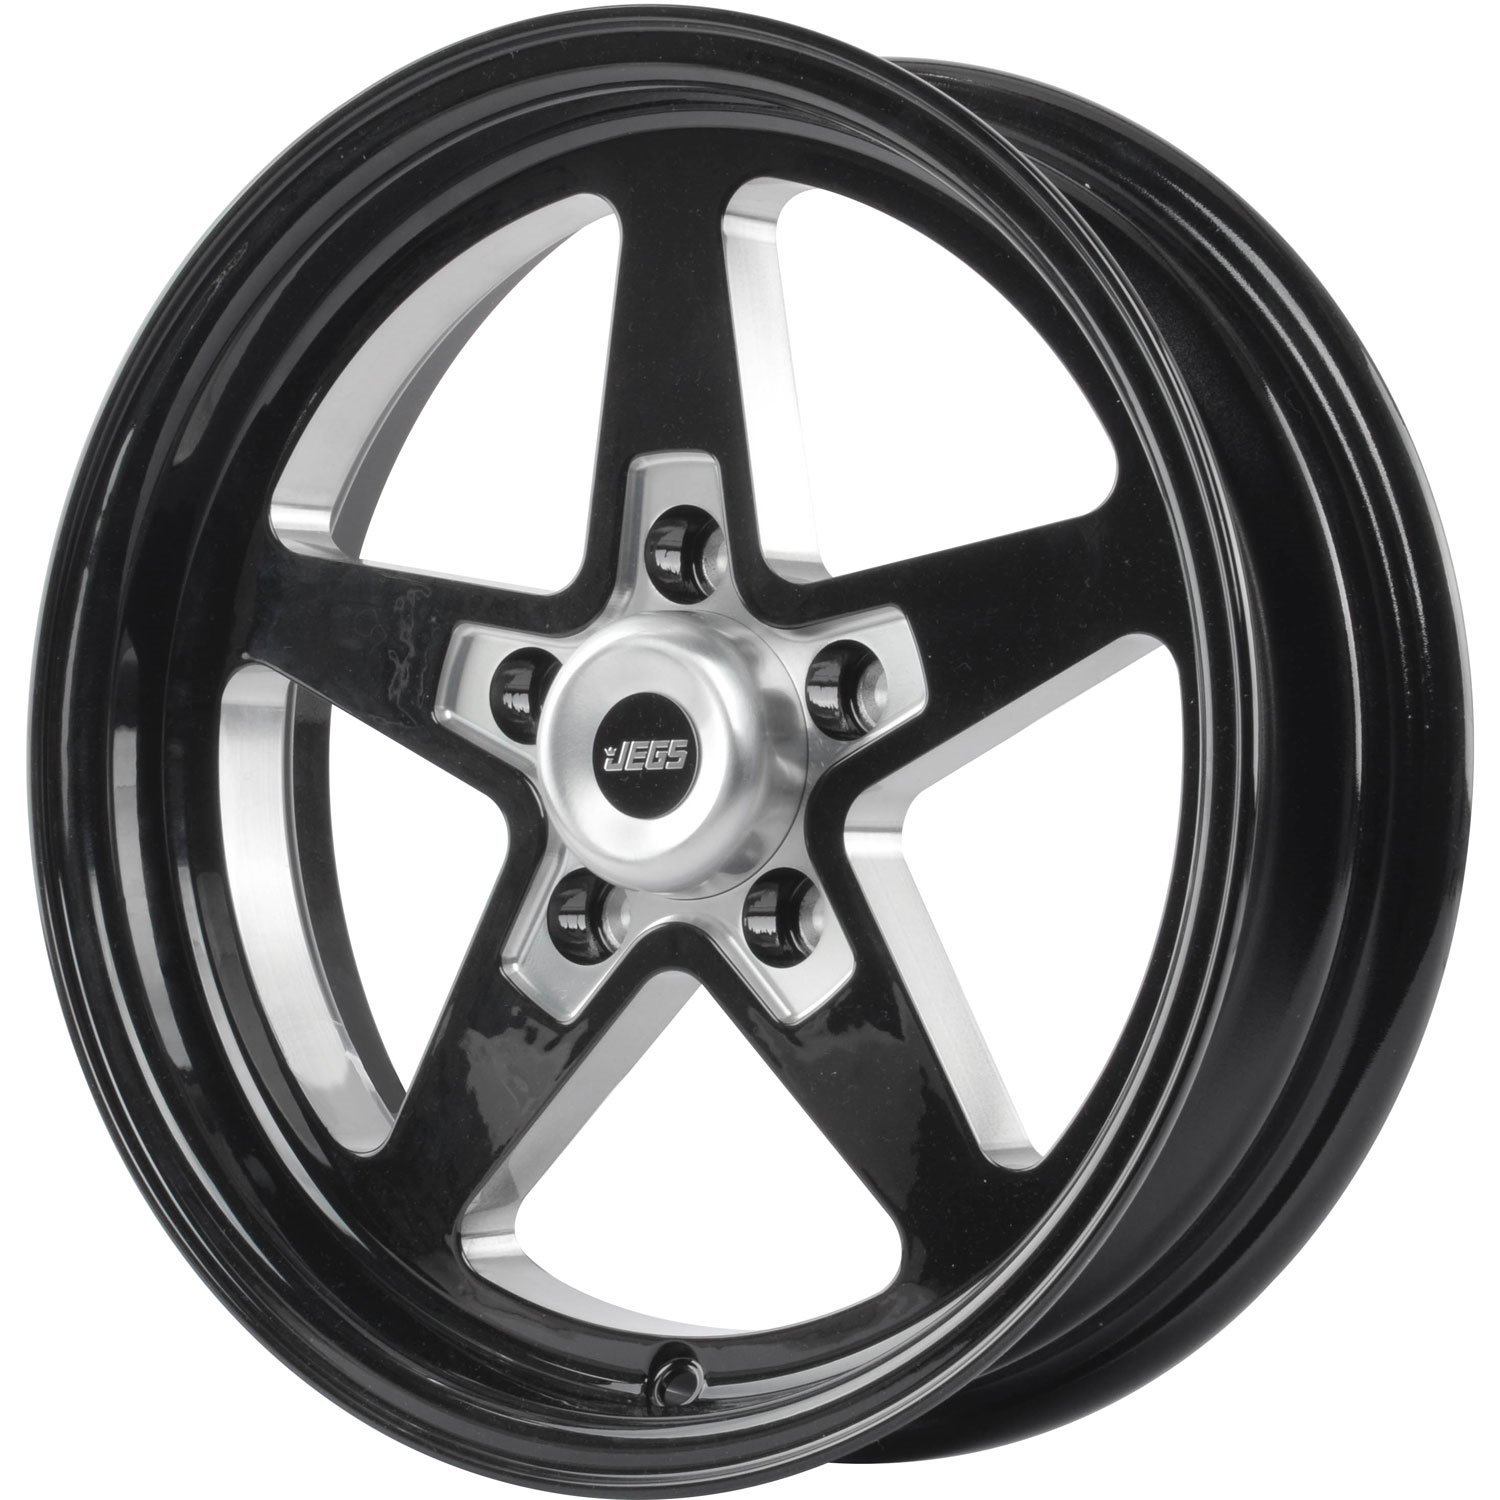 JEGS 681251: SSR Star Wheel [15" x 4"] | Bolt Pattern: 5 x 4.50" | Black  Powder Coat | Includes center cap | DOT Approved | Back Spacing: 1.75" |  Offset: -19 mm | Each - JEGS